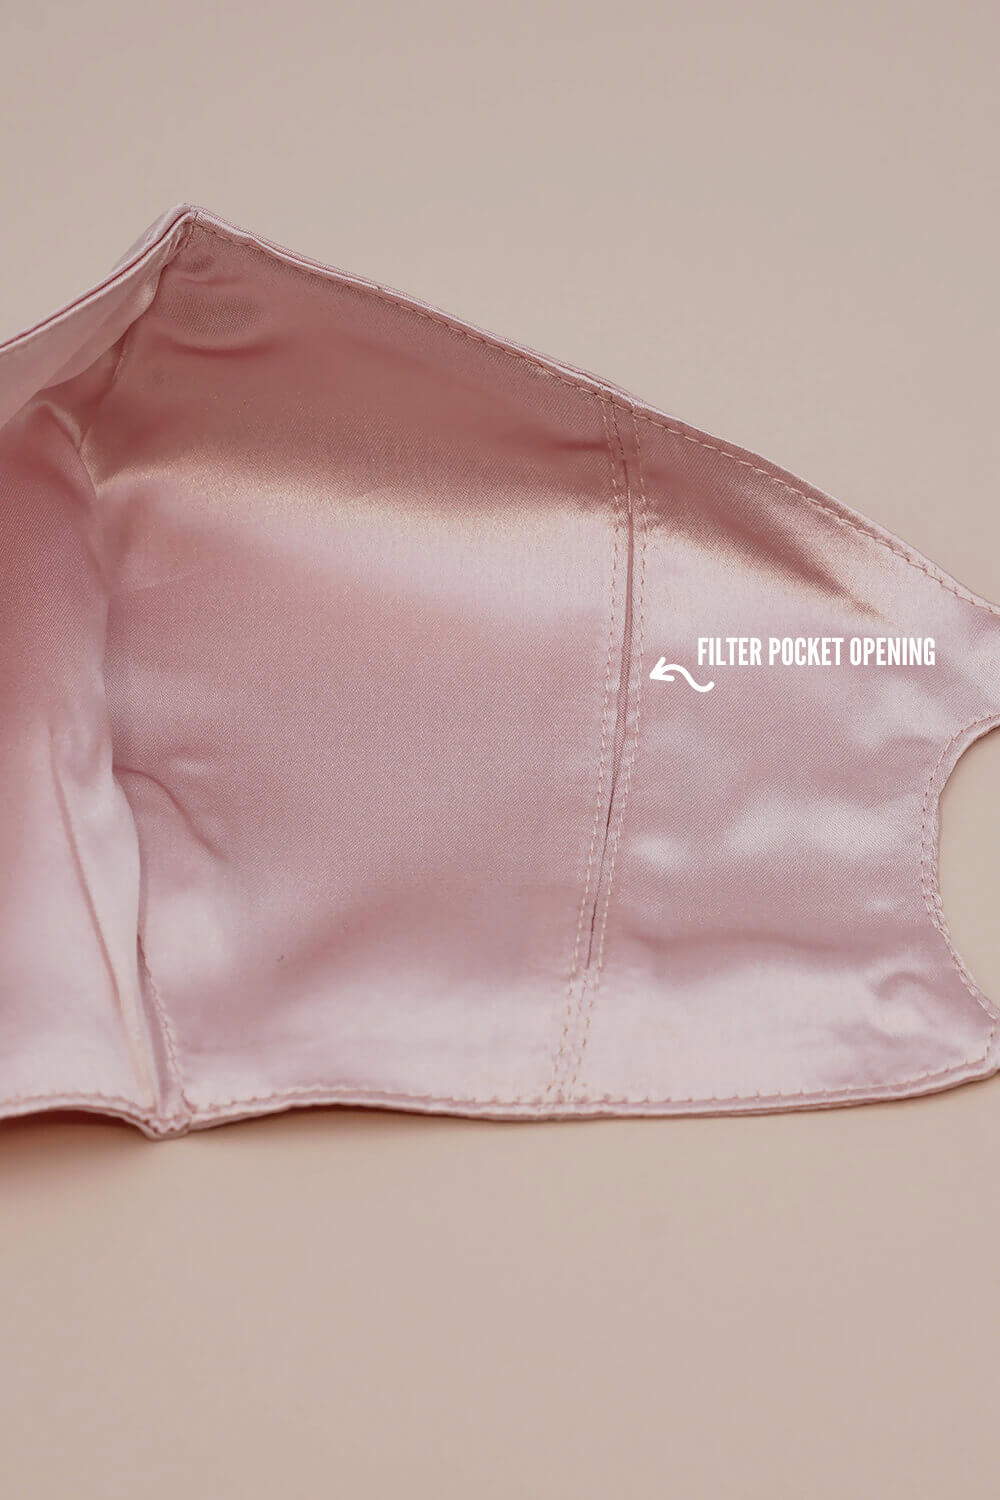 STELLAR Silk Face Mask - Pink (with Nose Wire and Filter Pocket) - BASK™